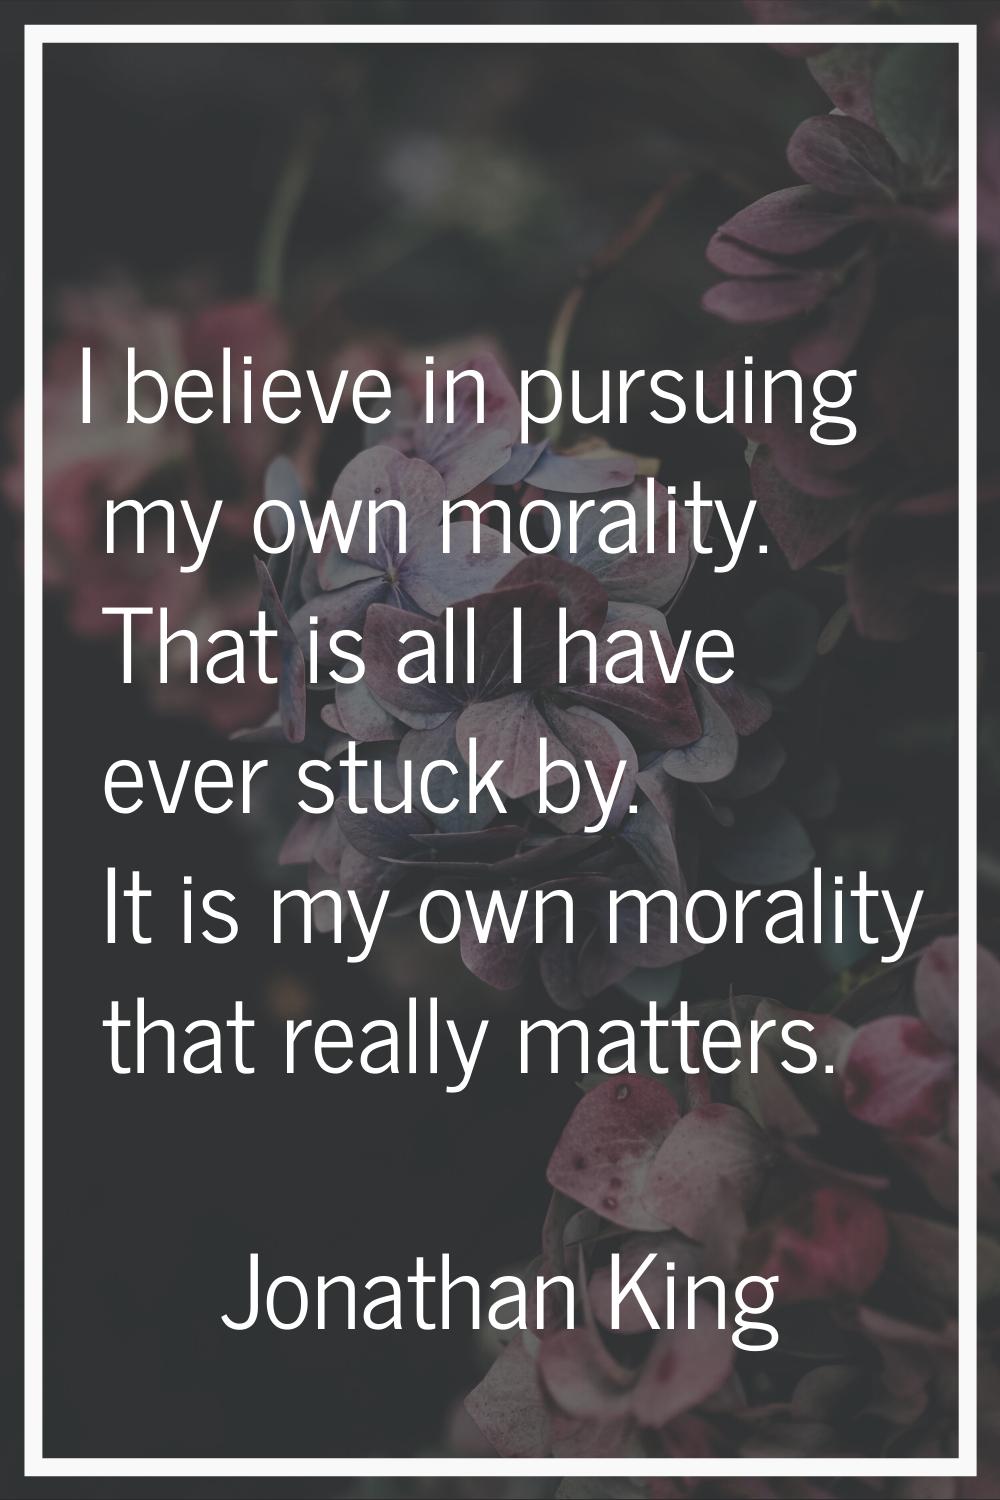 I believe in pursuing my own morality. That is all I have ever stuck by. It is my own morality that